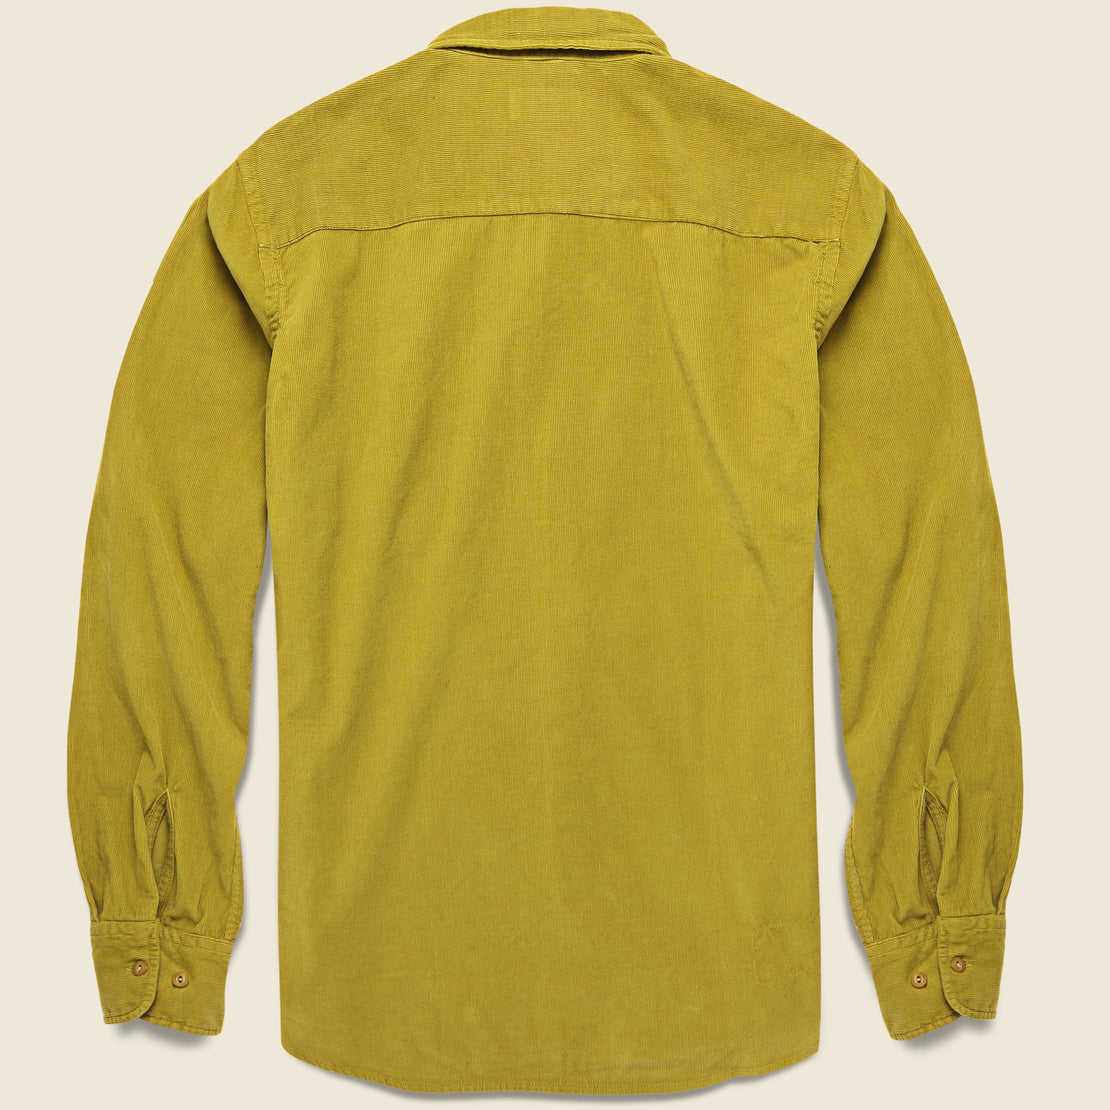 Cord Everyday Shirt - Mustard - Universal Works - STAG Provisions - Tops - L/S Woven - Corduroy